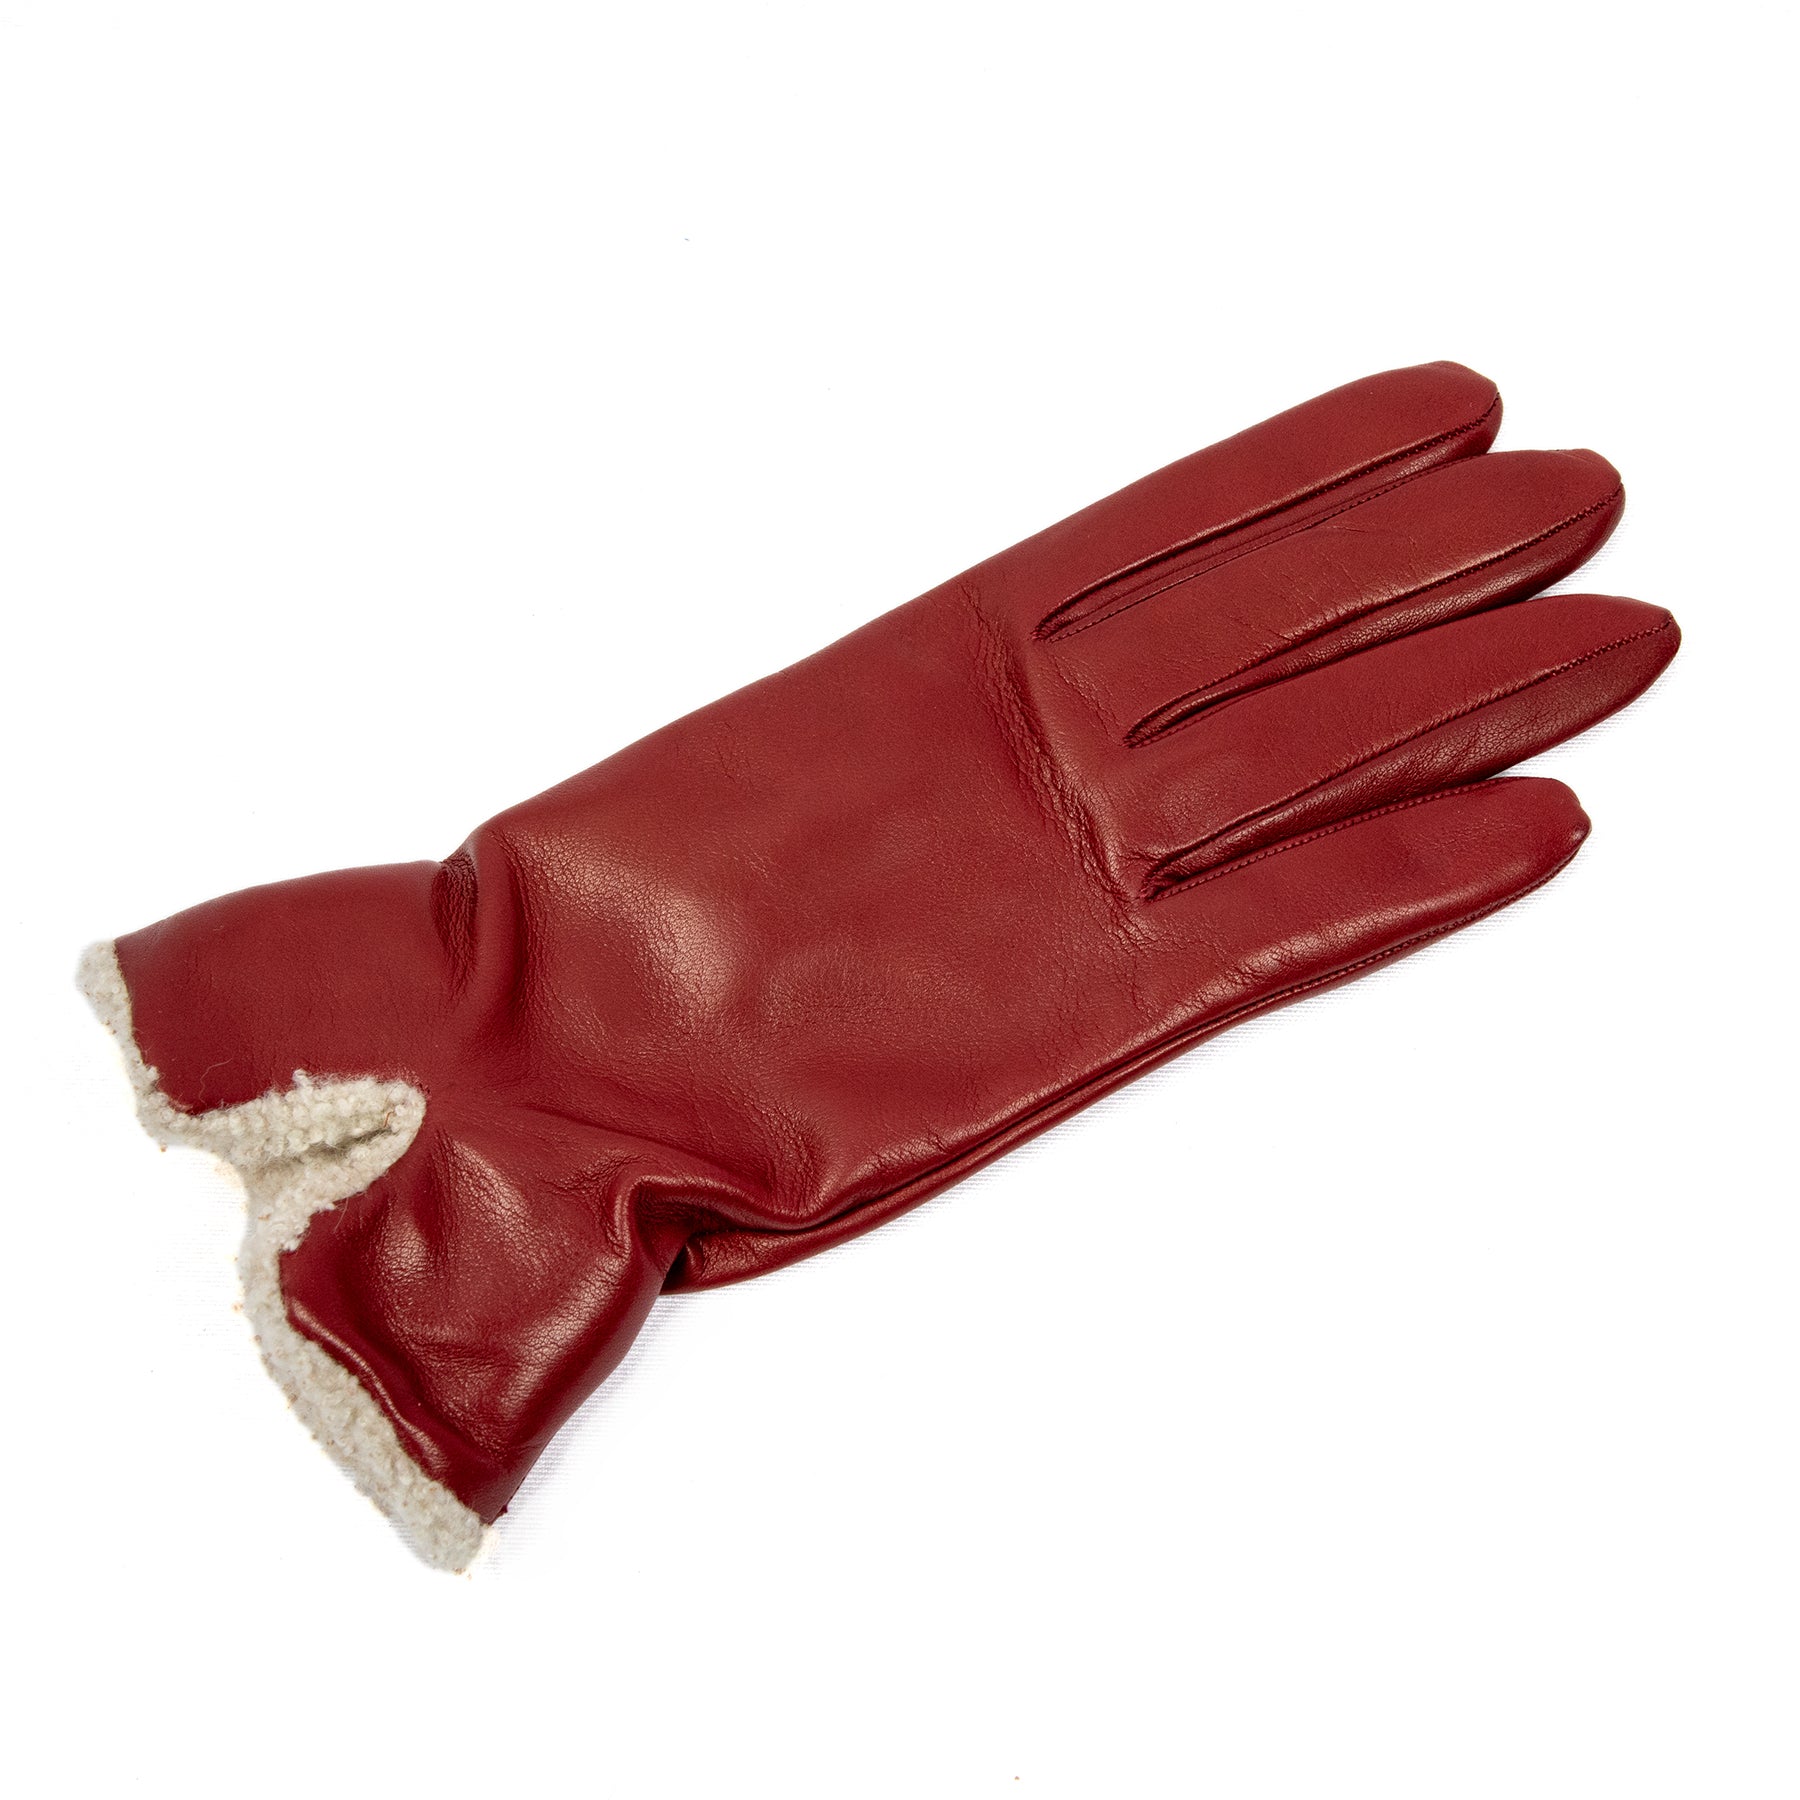 Women's burgundy nappa leather gloves with shearling cuff